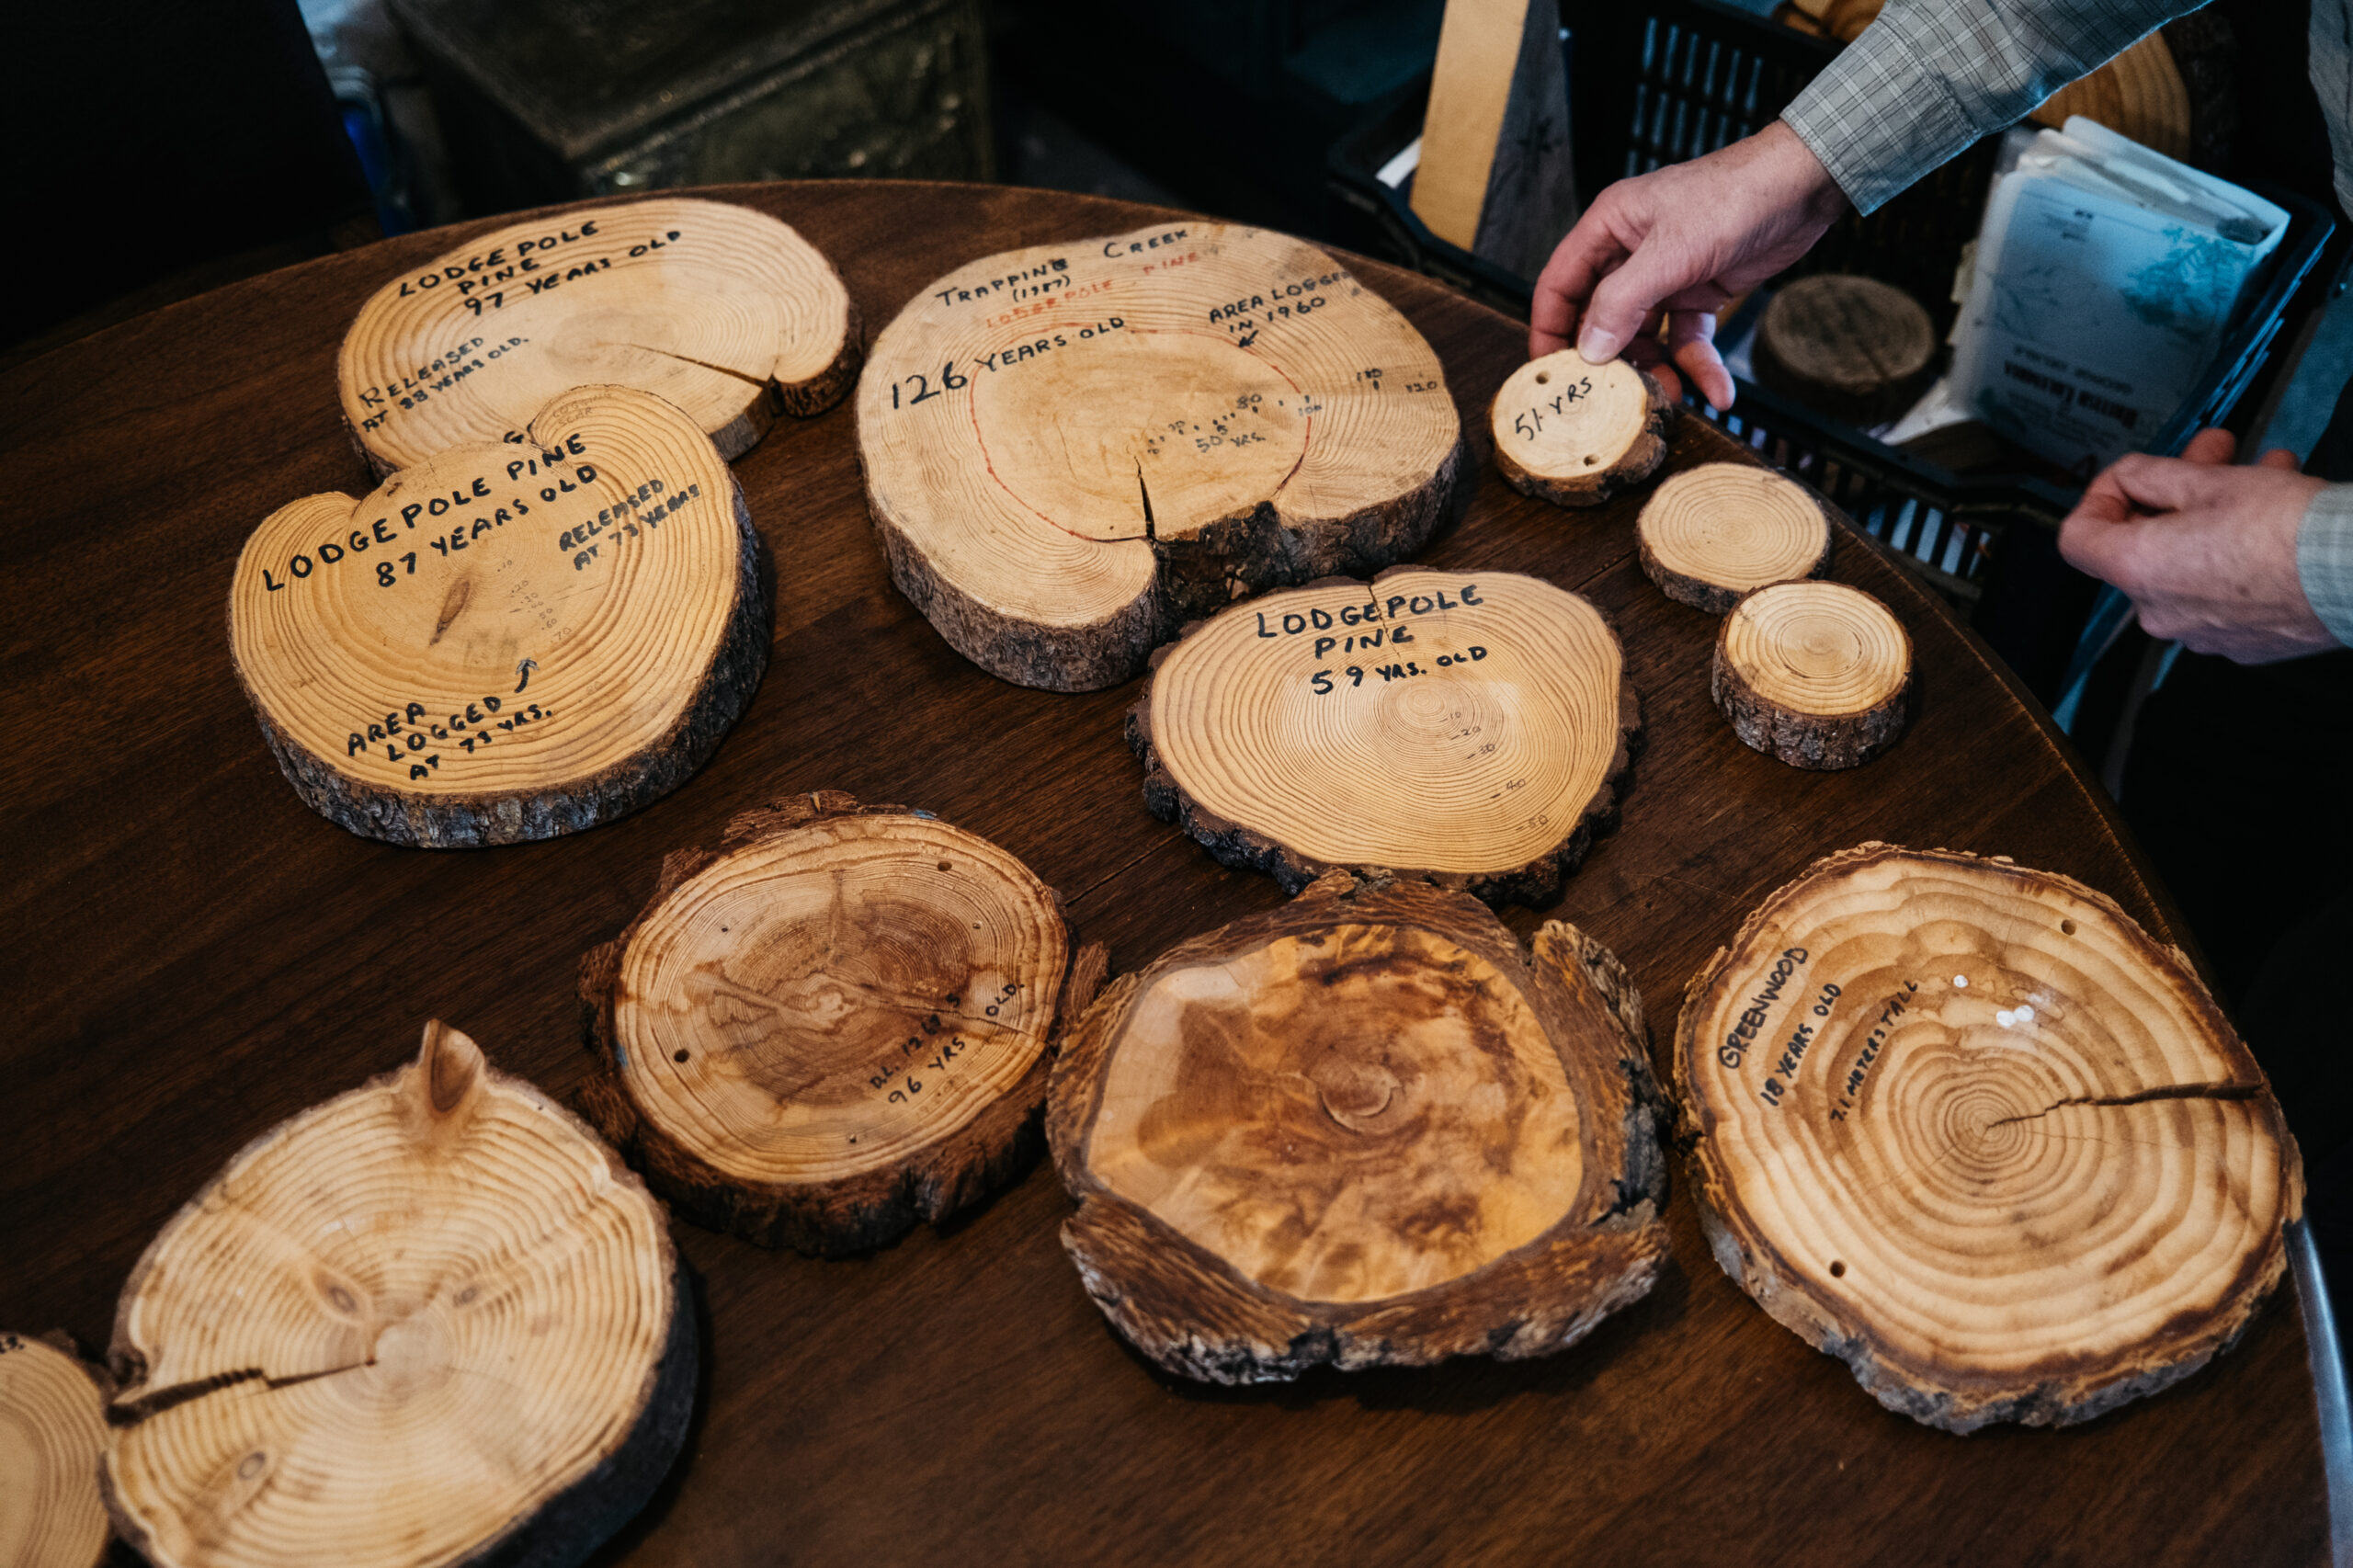 Forester George Delisle displays his collection of "cookies" showing the age and location of these trees.